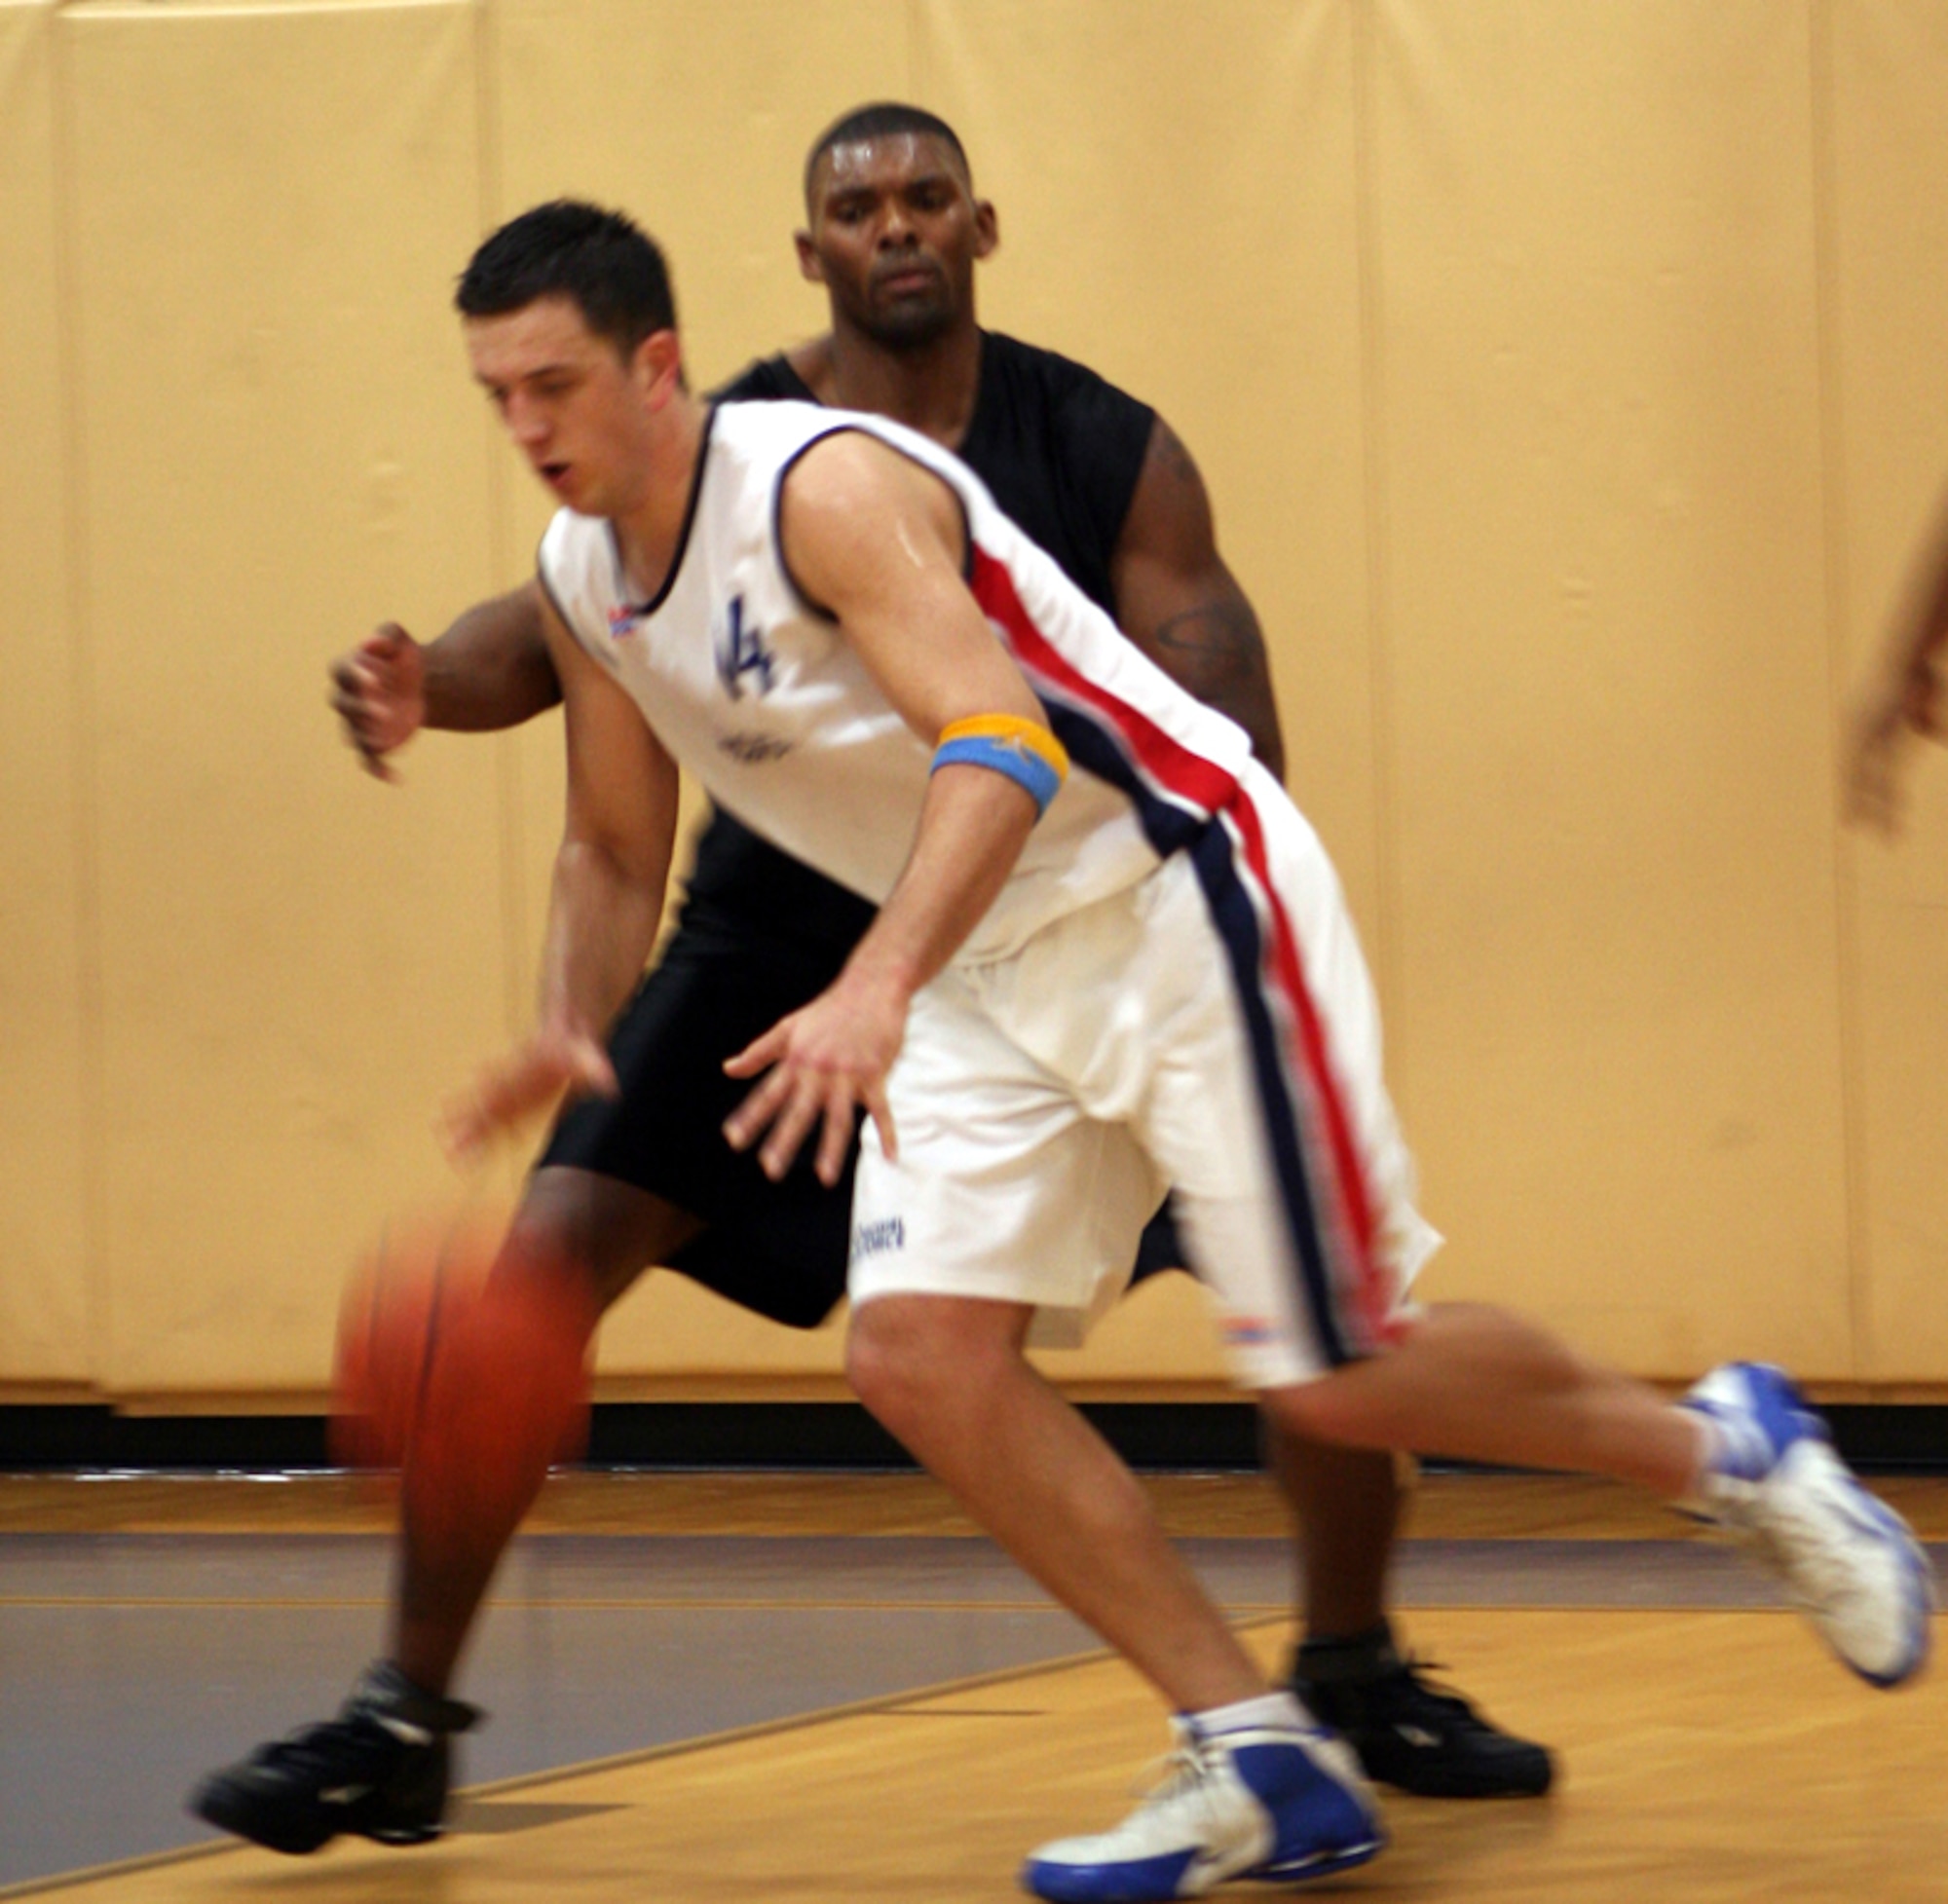 Commando Jammar Major (in black) attempts to steal the ball from a Royal Air Force player during an exhibition game Feb. 22 in the Commando Fitness Center. (U.S. Air Force photo by Jamie Haig)